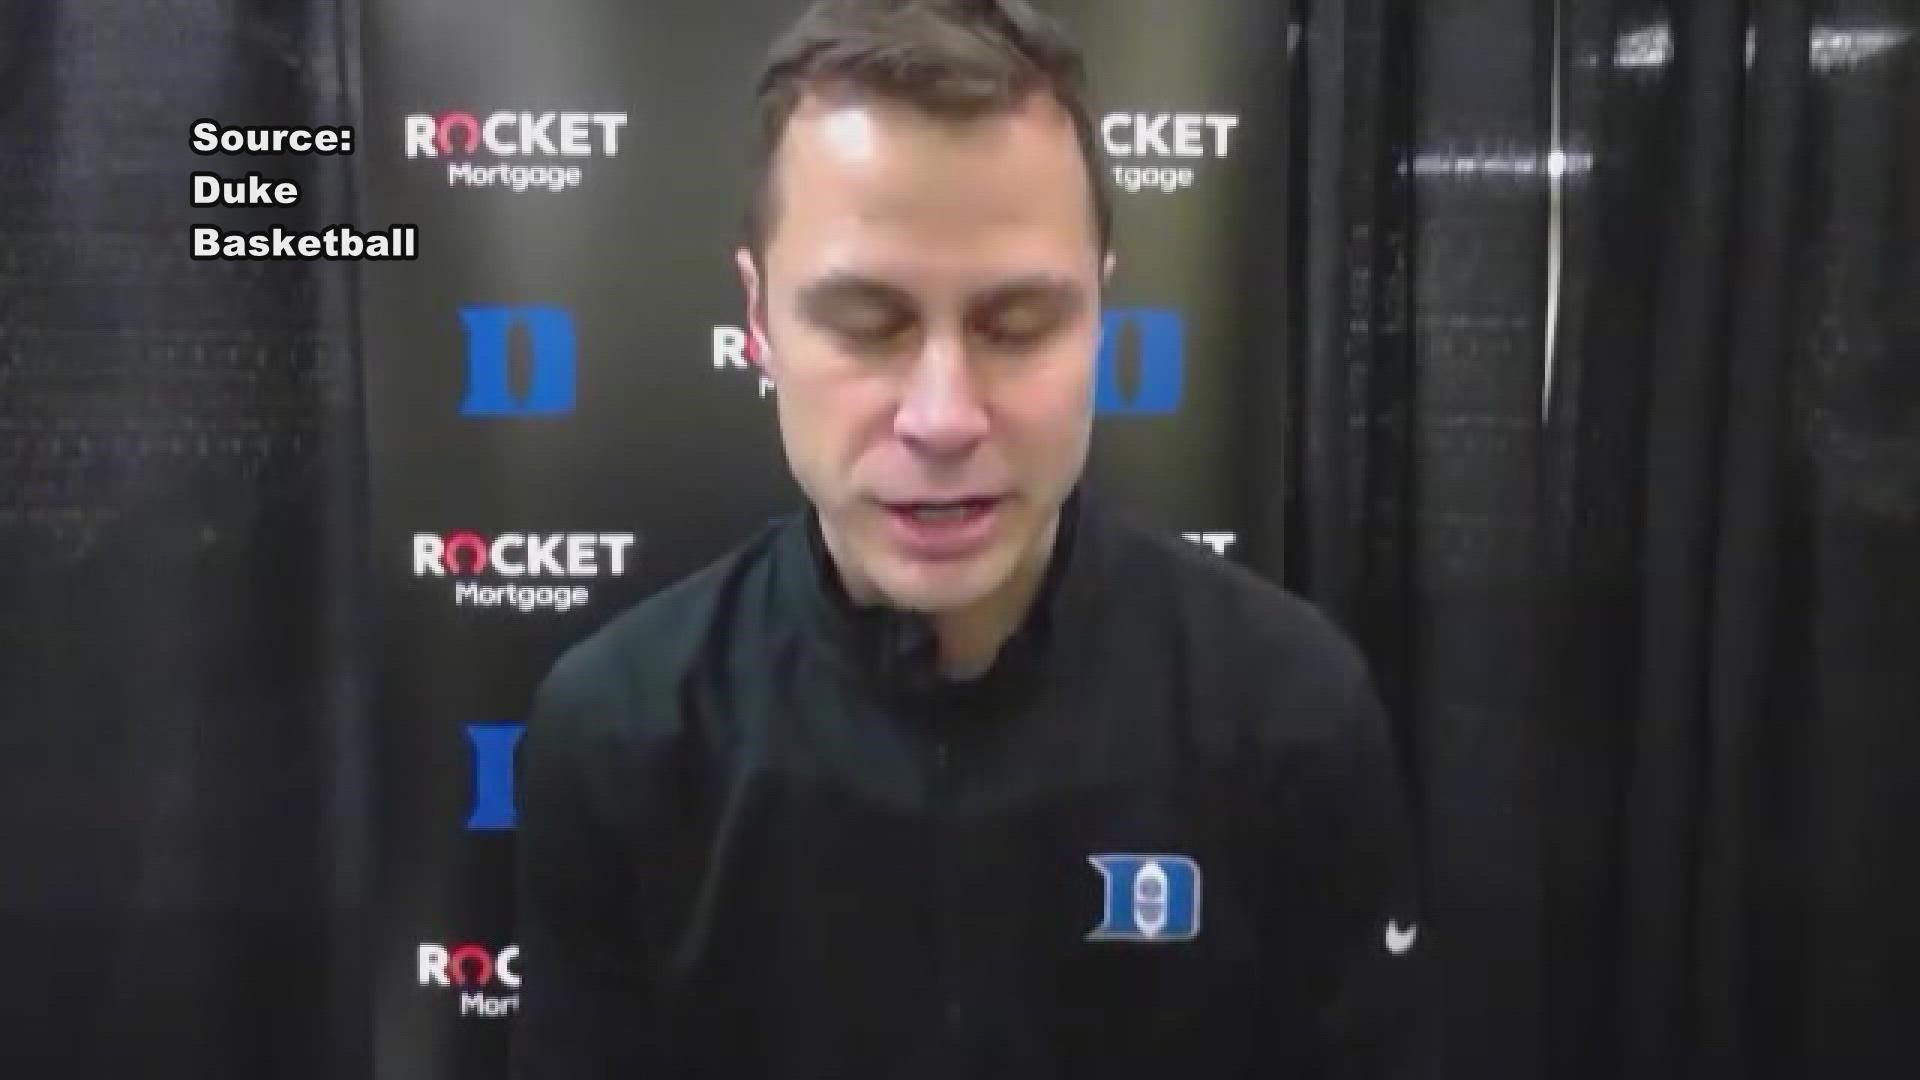 Scheyer was the Blue Devils acting Head Coach with Mike Krzyzewski out with a non COVID-19 related illness.